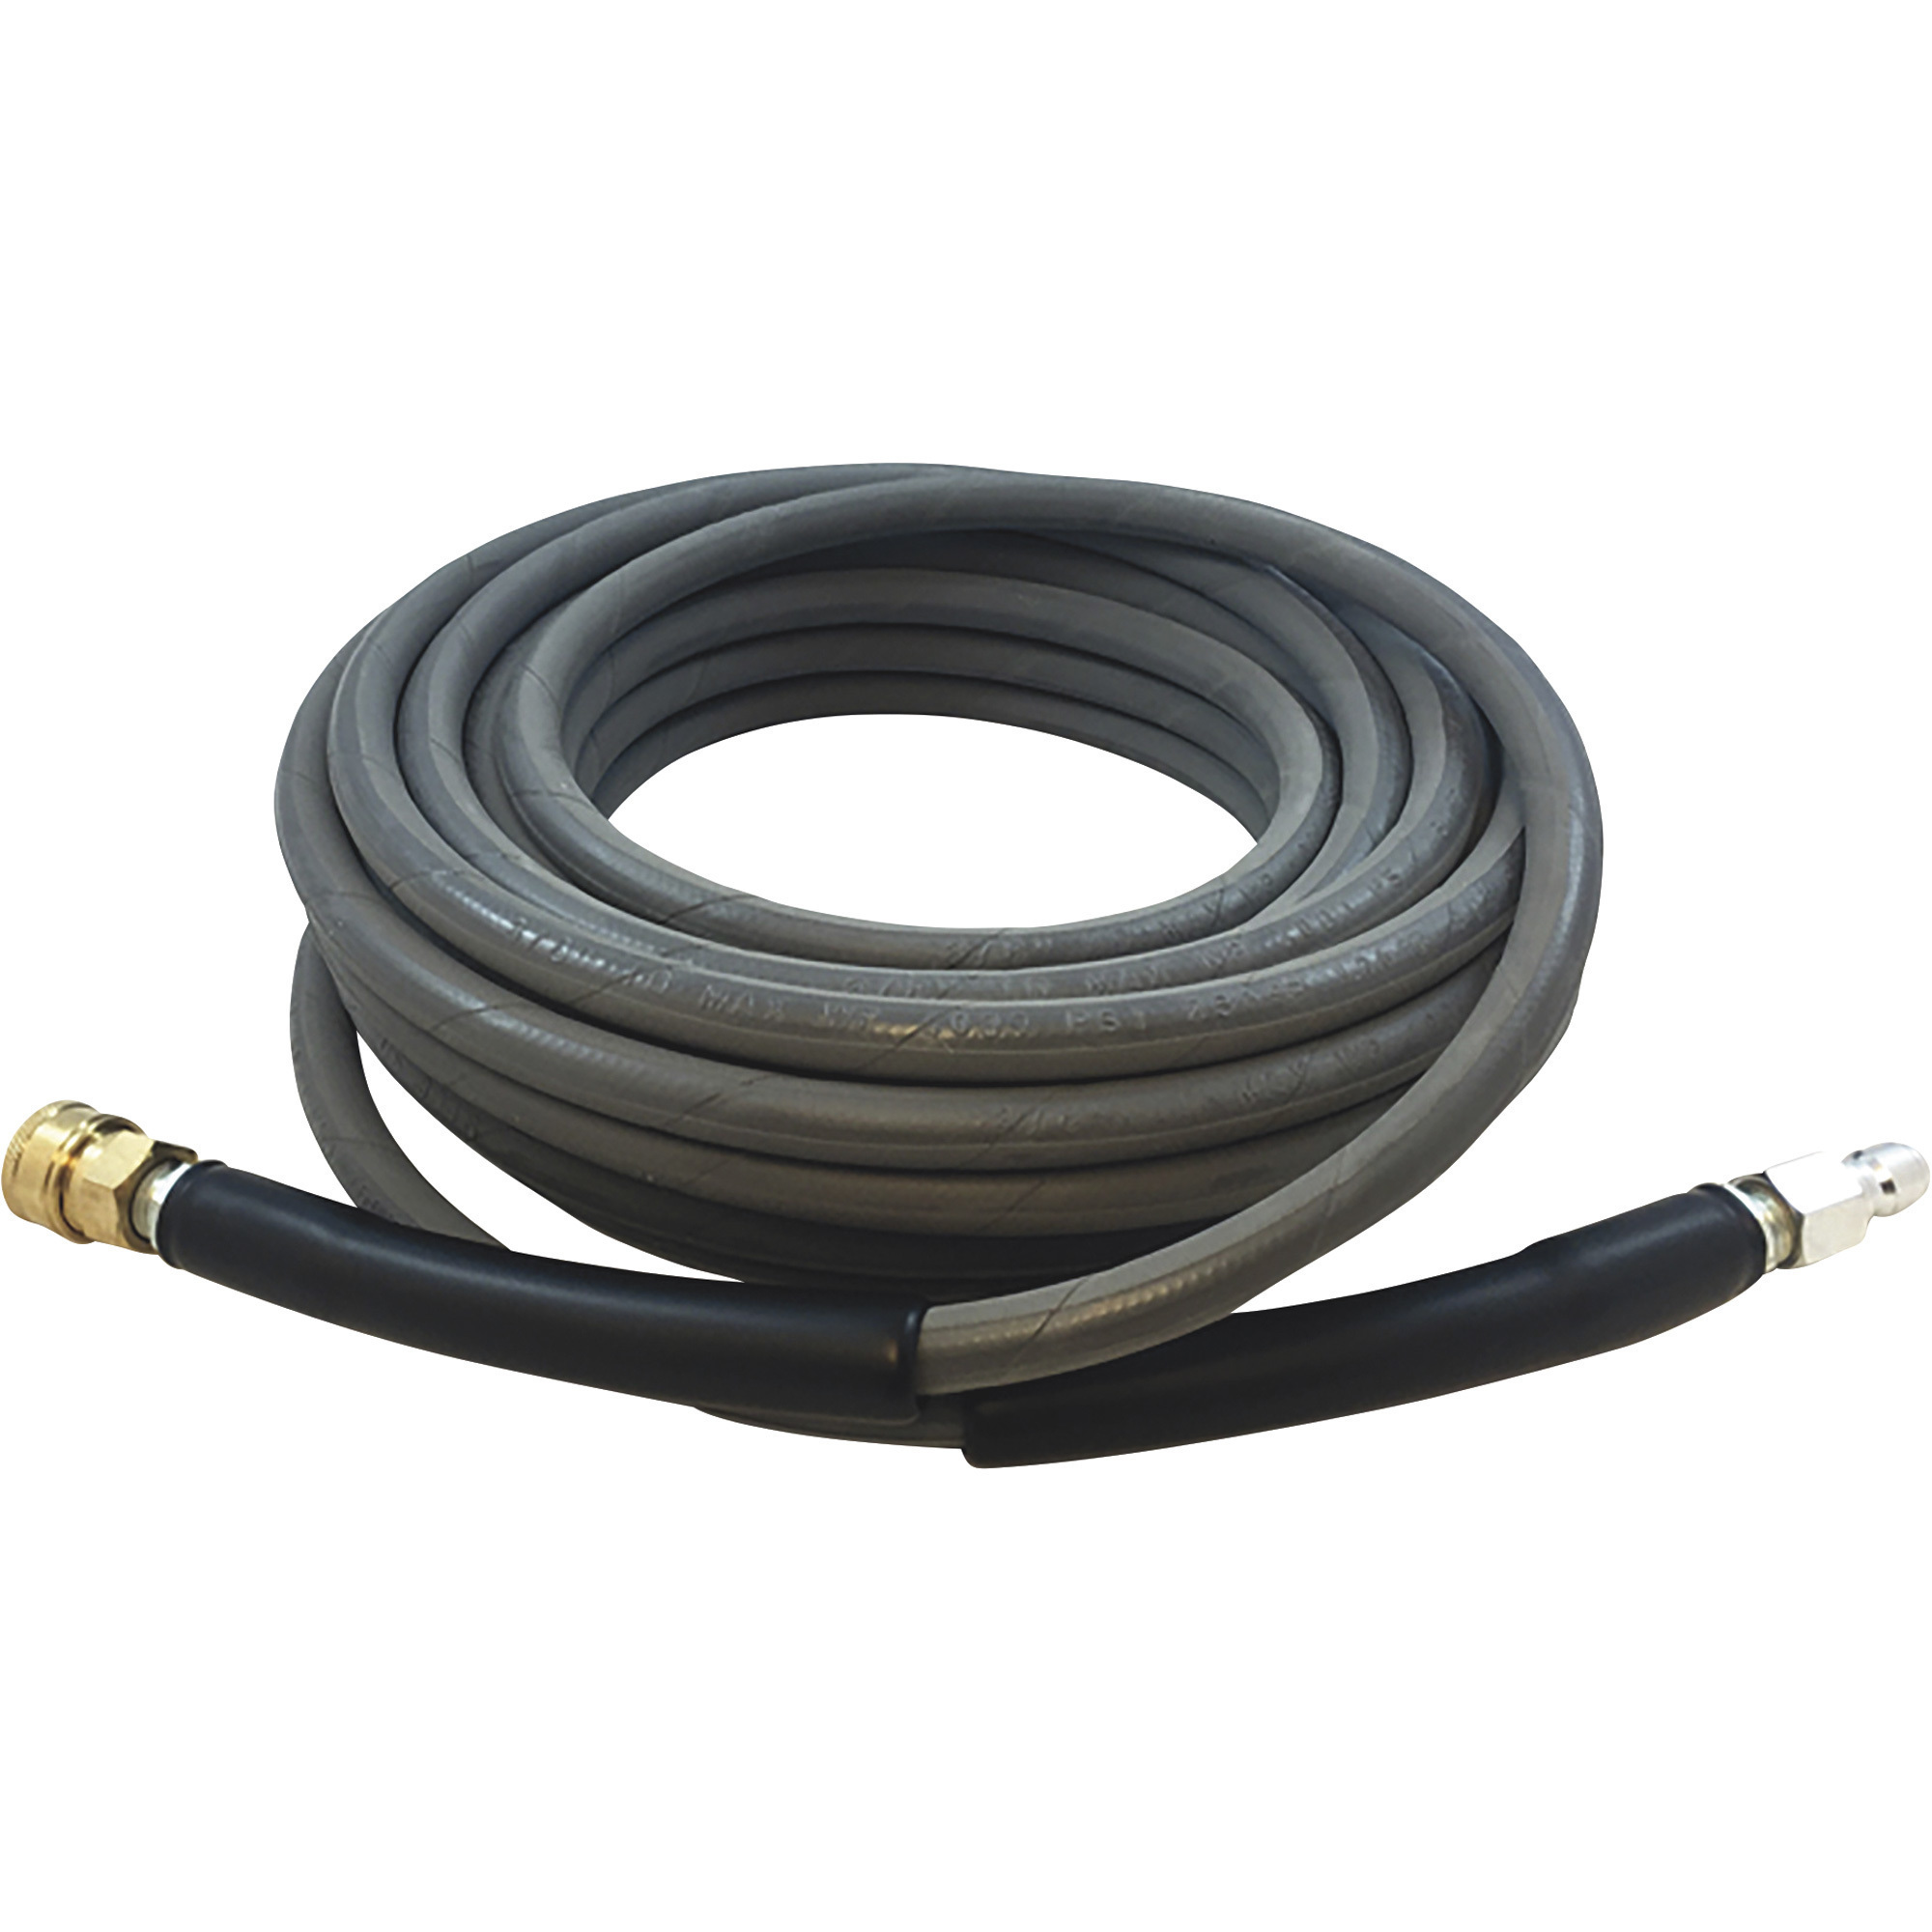 Northstar Nonmarking Pressure Washer Hose - 4000 psi, 50ft. x 3/8in. Model Number 989401980, Gray